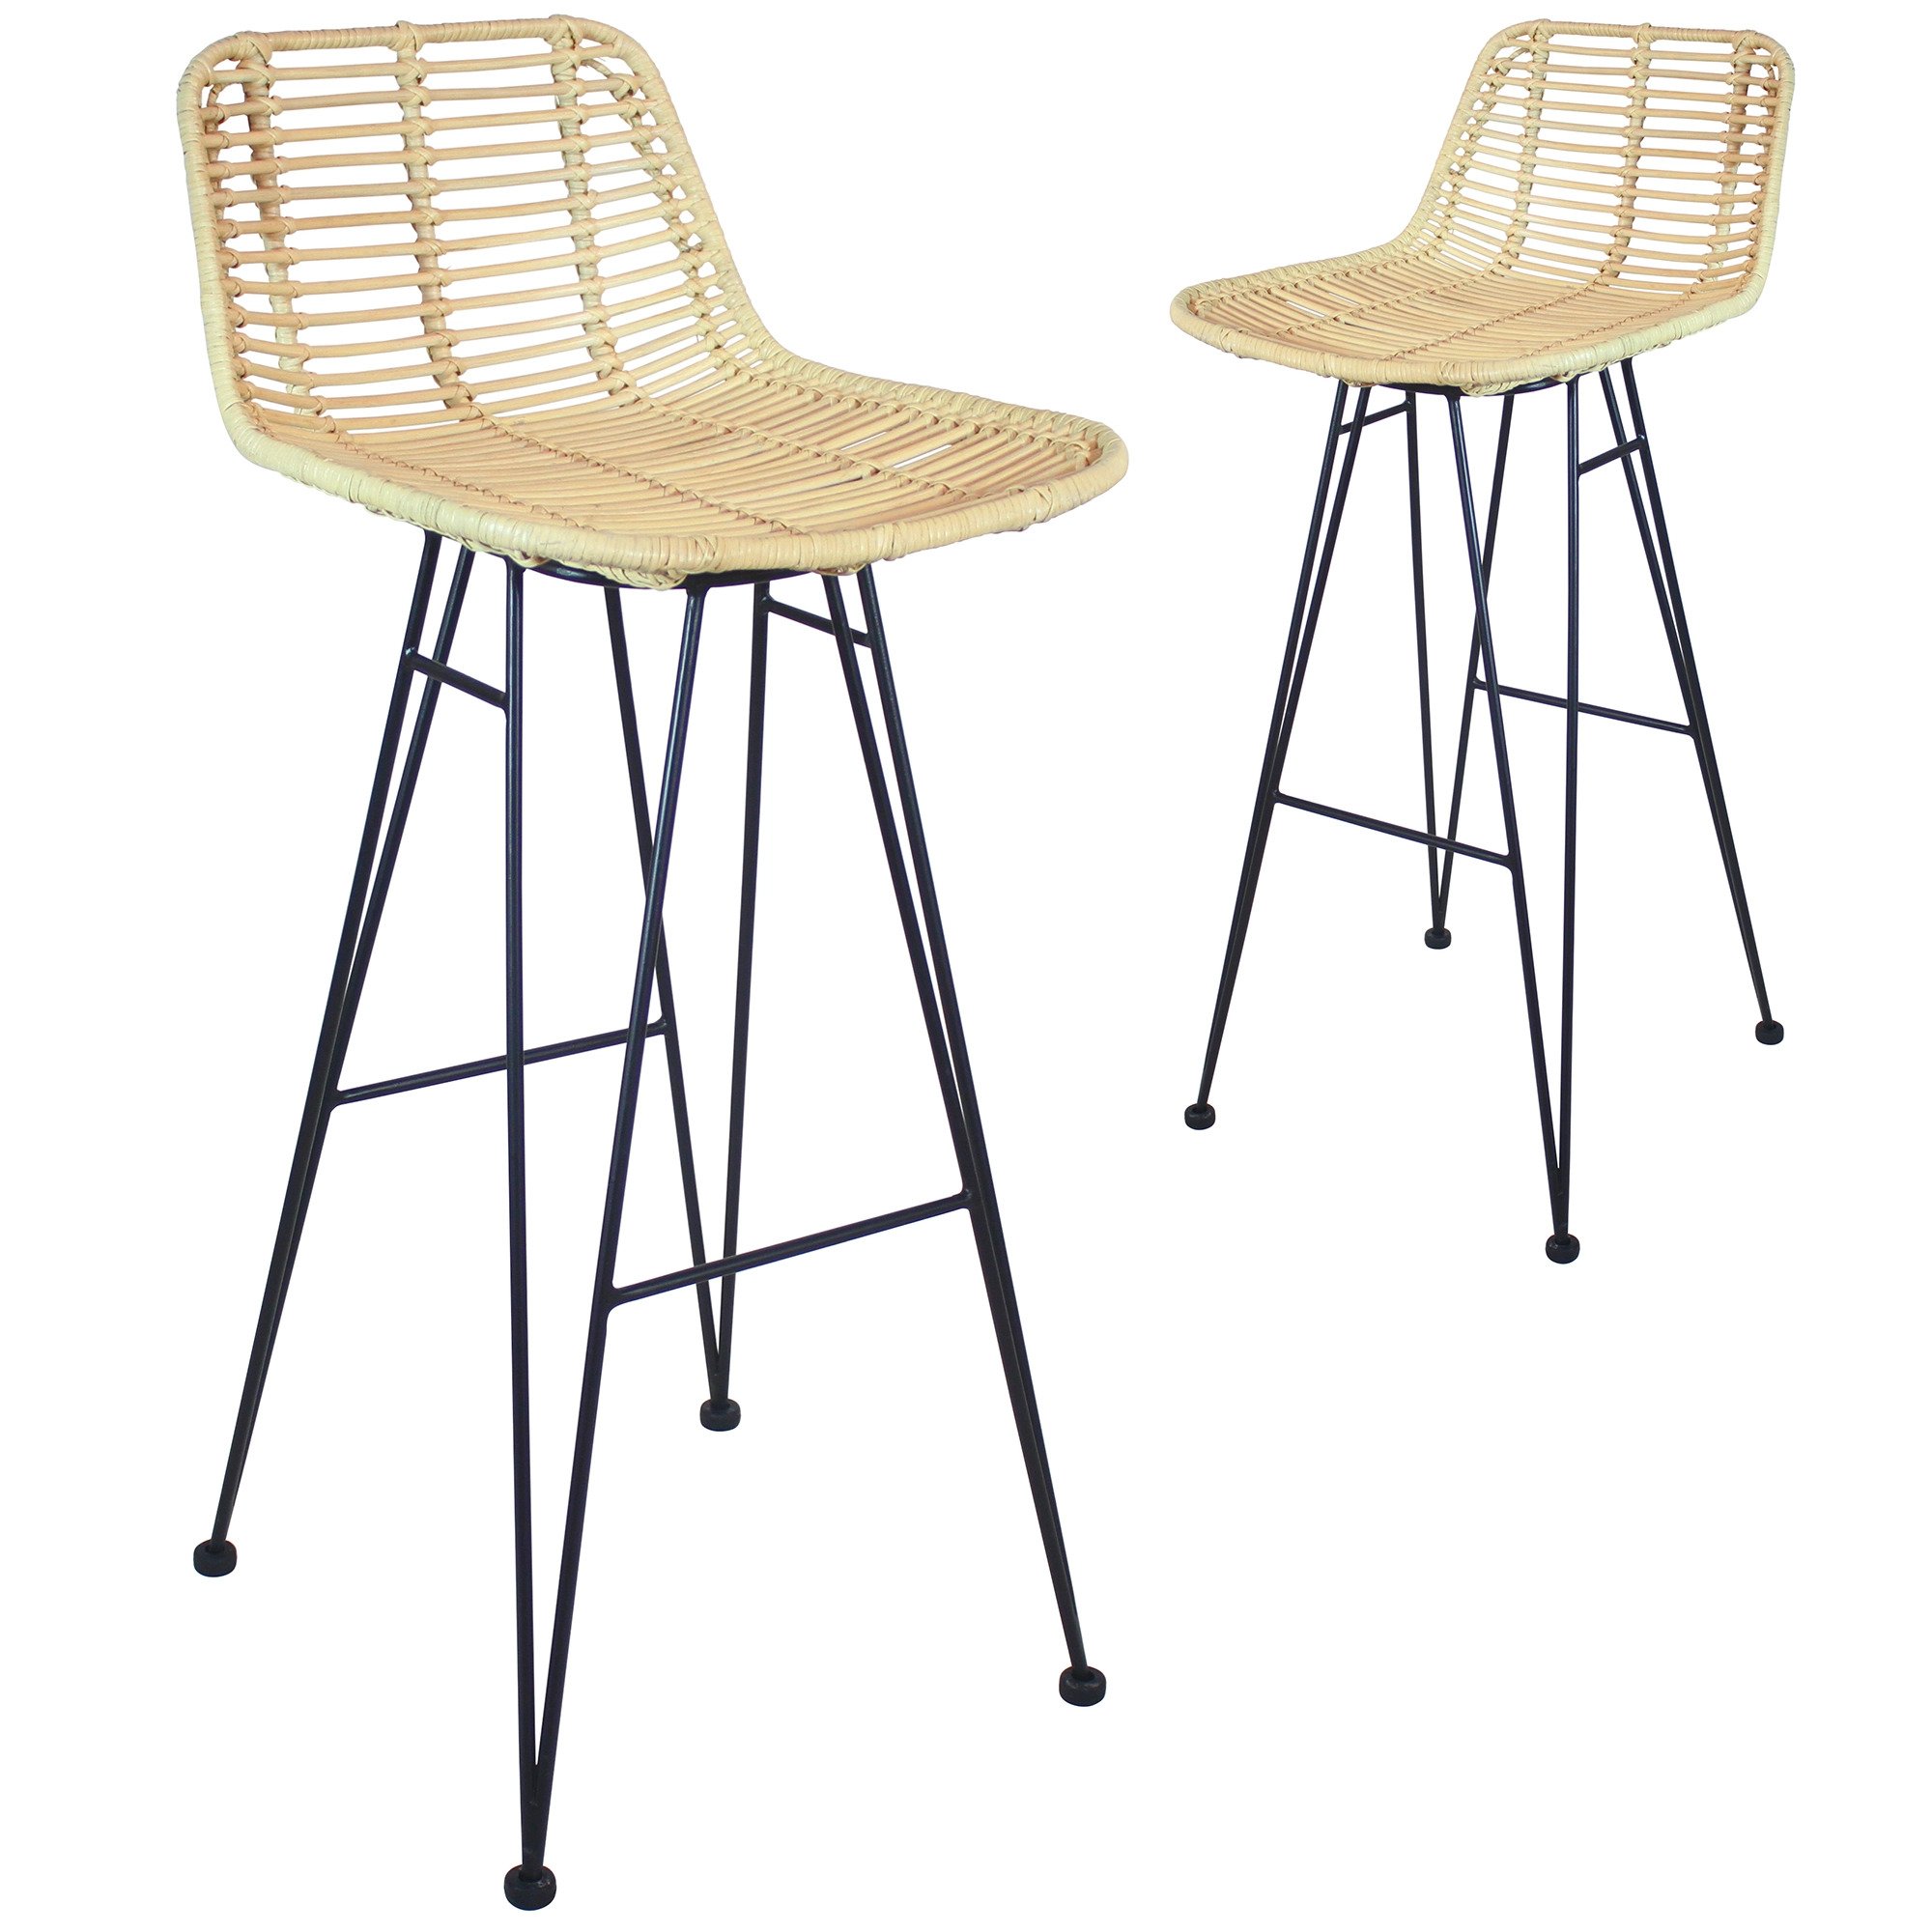 Set of 2 Kayla rattan bar stools with contemporary metal framed legs 